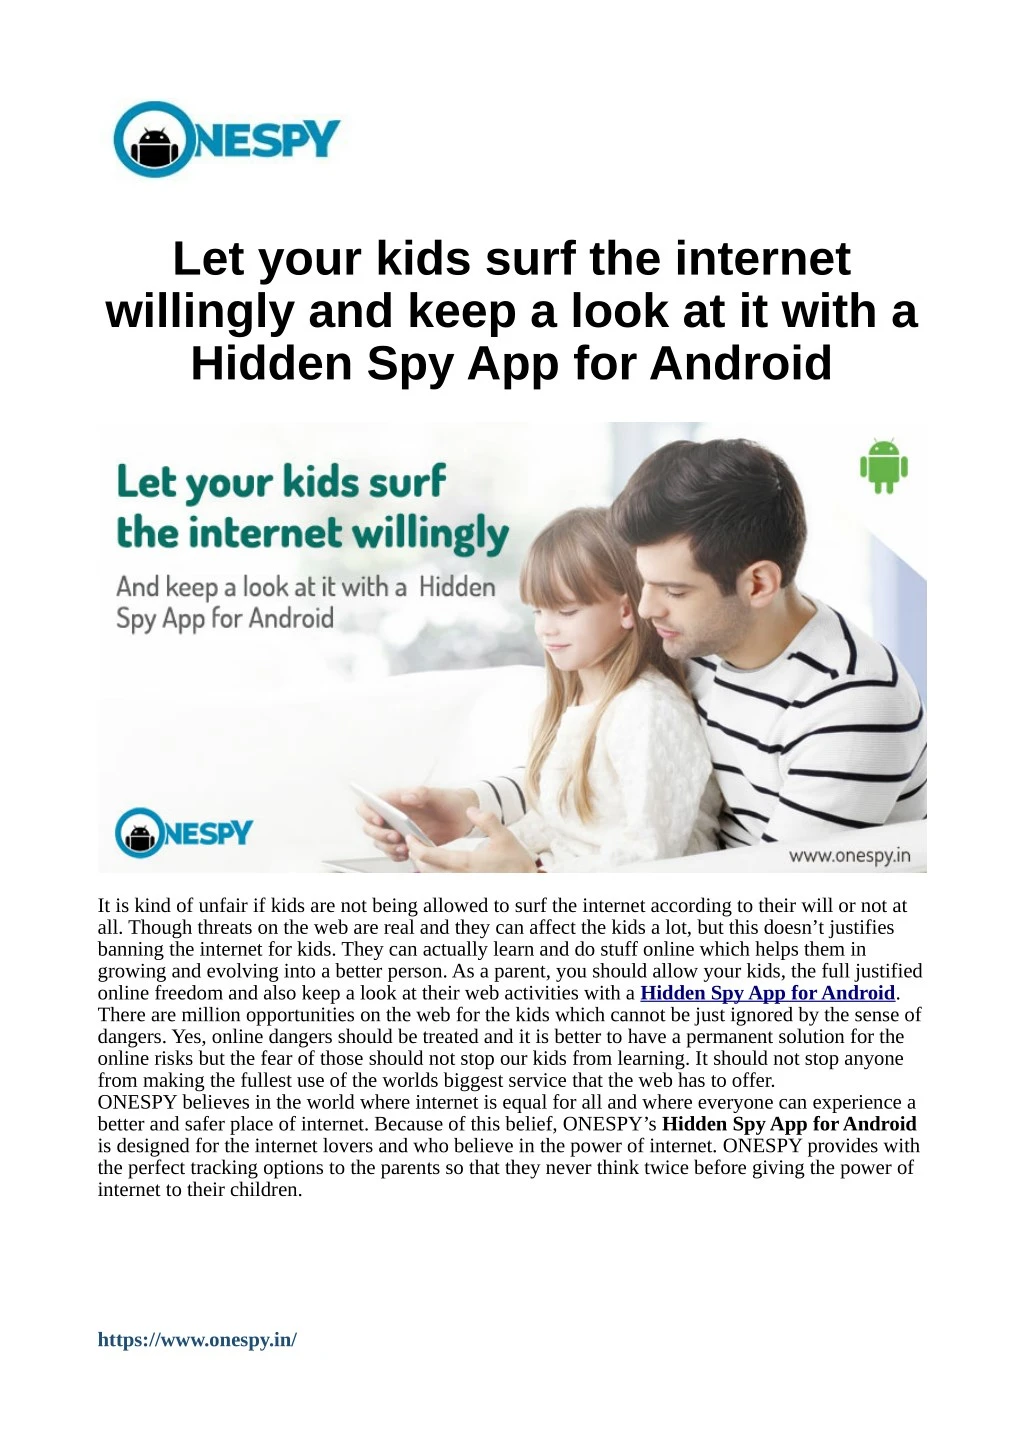 let your kids surf the internet willingly